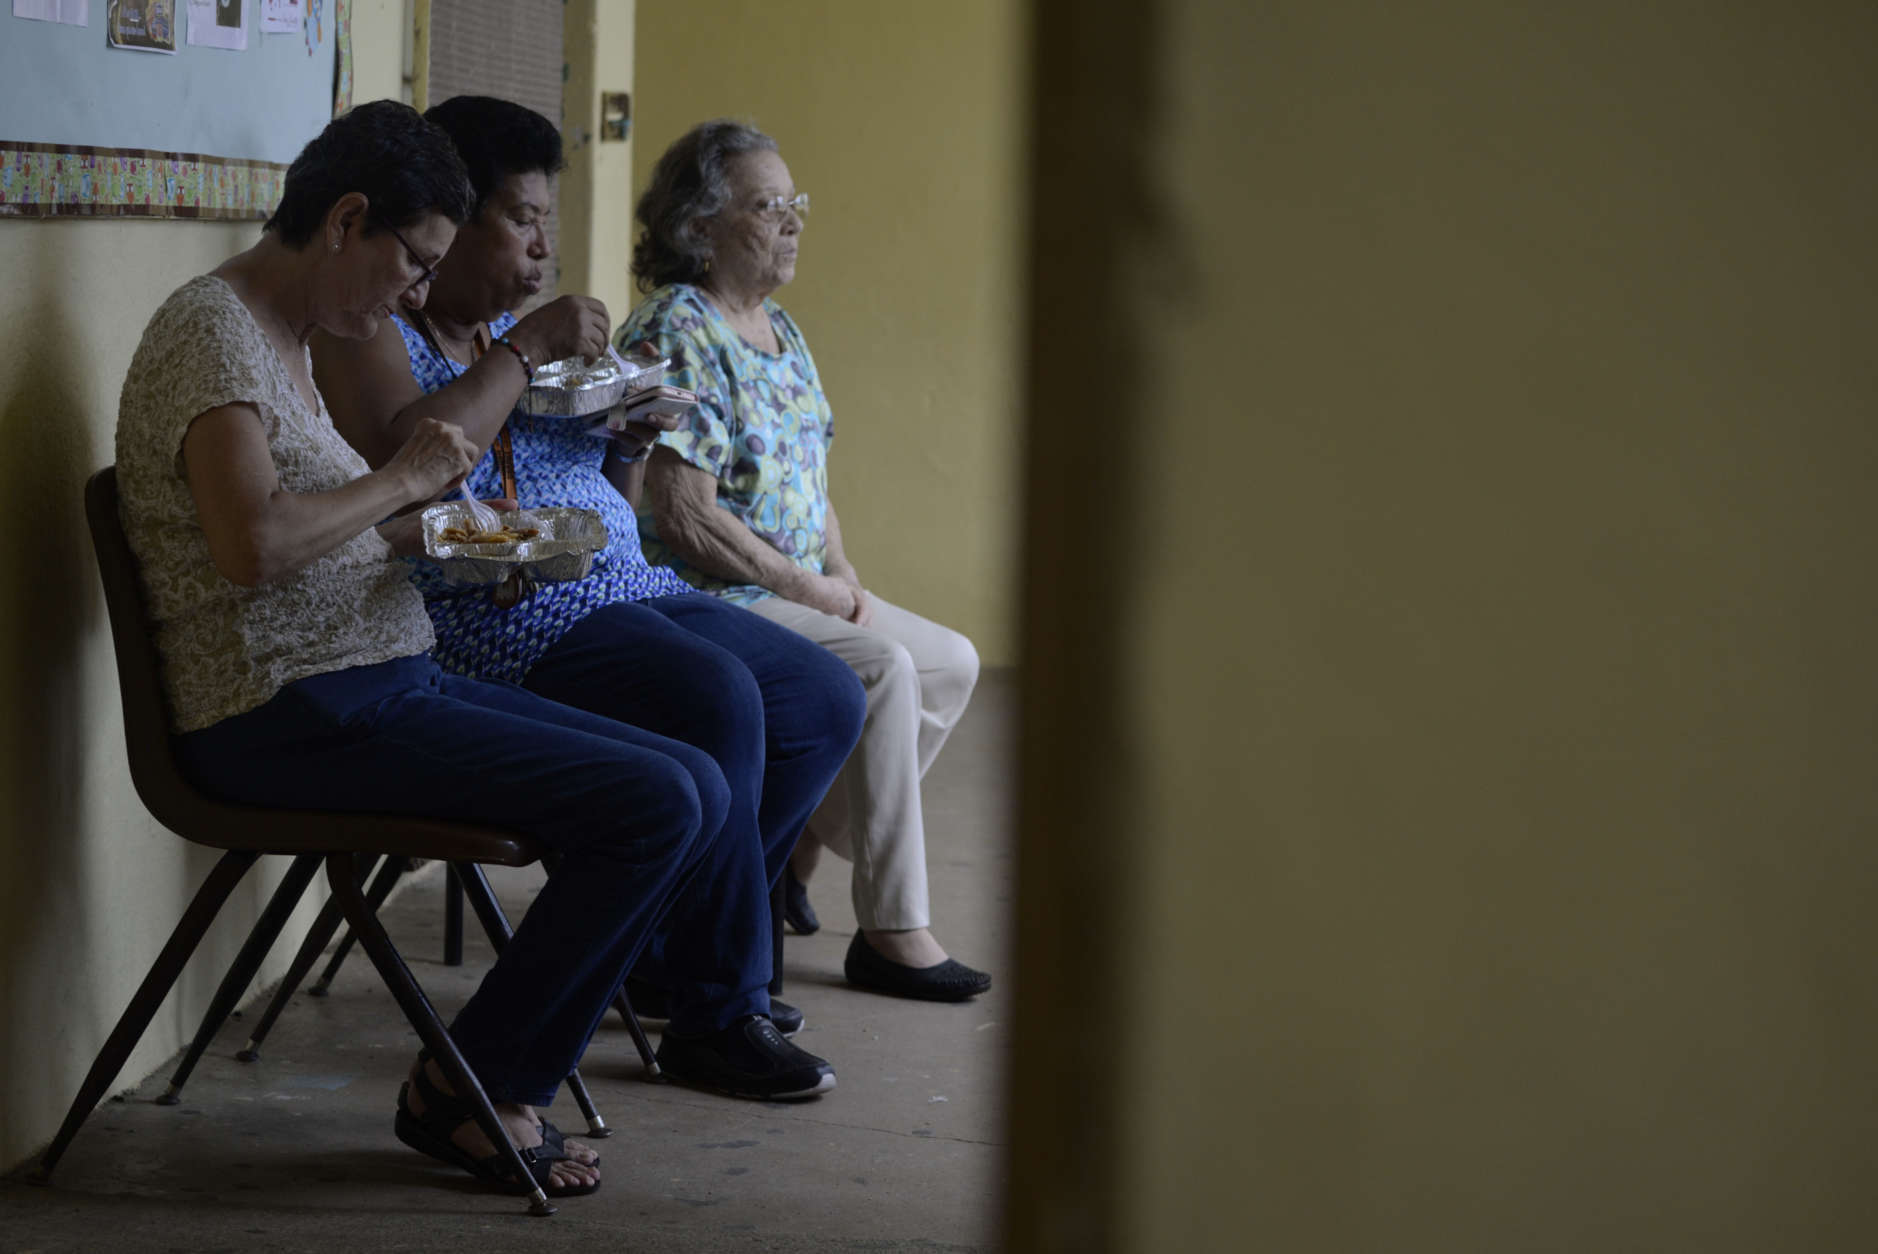 Women eat at the Juan Ponce de Leon Elementary School before the arrival of Hurricane Maria, in Humacao, Puerto Rico, Tuesday, Sept. 19, 2017. Puerto Rico is likely to take a direct hit by the category 5 hurricane. Authorities warned people who live in wooden or flimsy homes should find safe shelter before the storm's expected arrival on Wednesday. (AP Photo/Carlos Giusti)